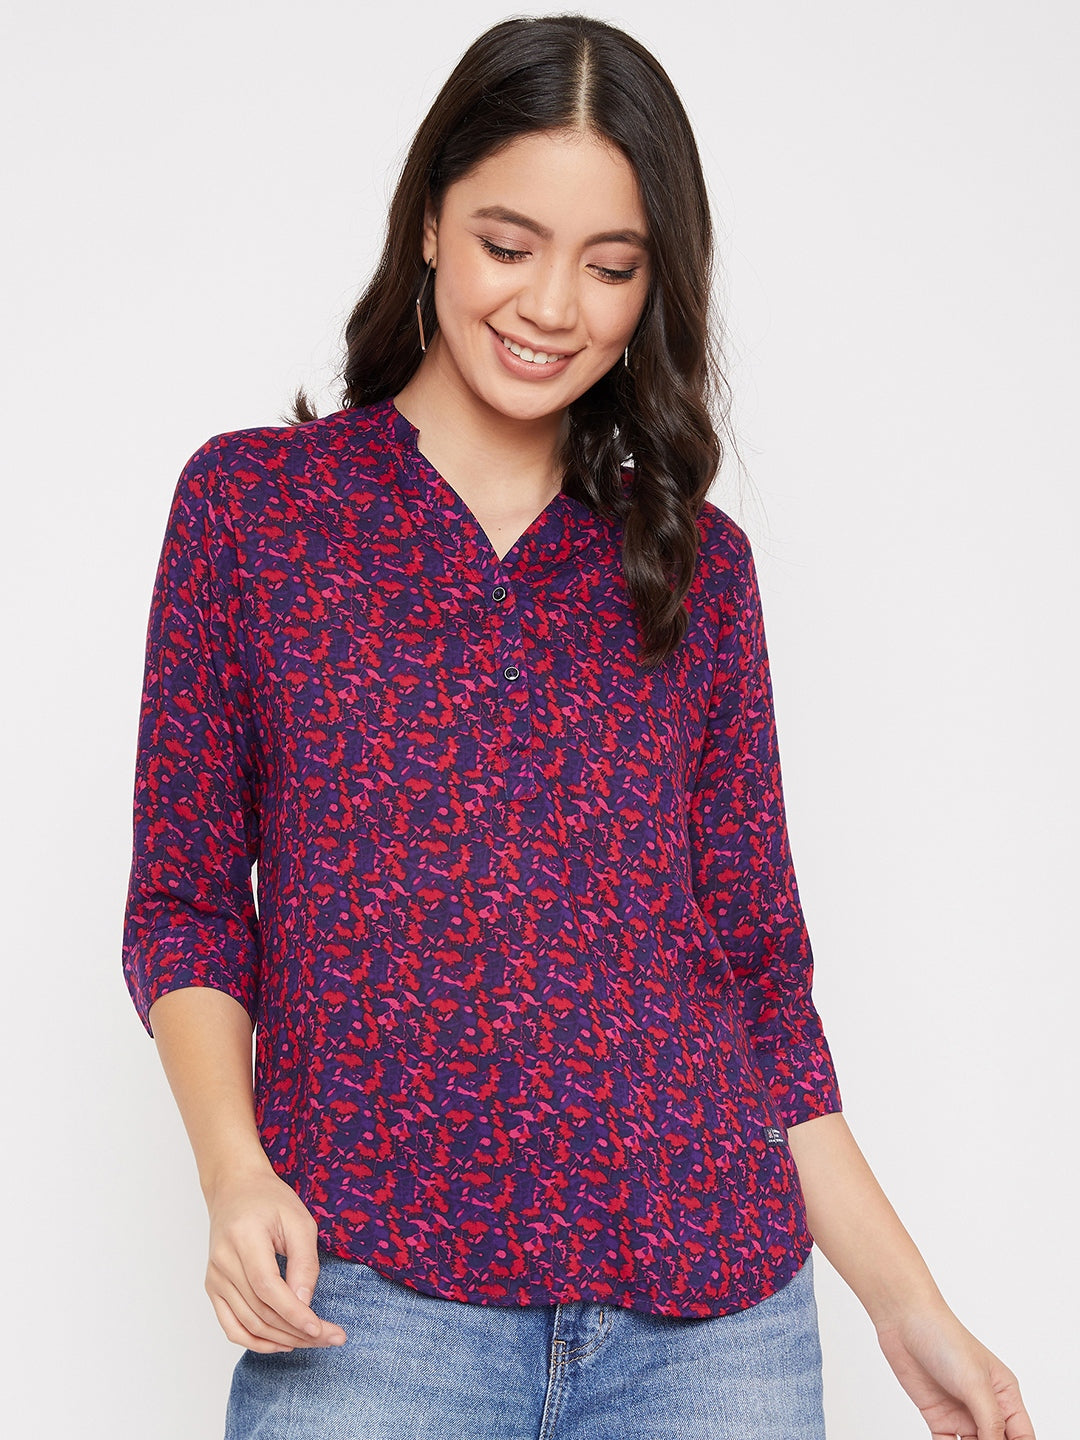 Red and Blue Printed Top - Women Tops